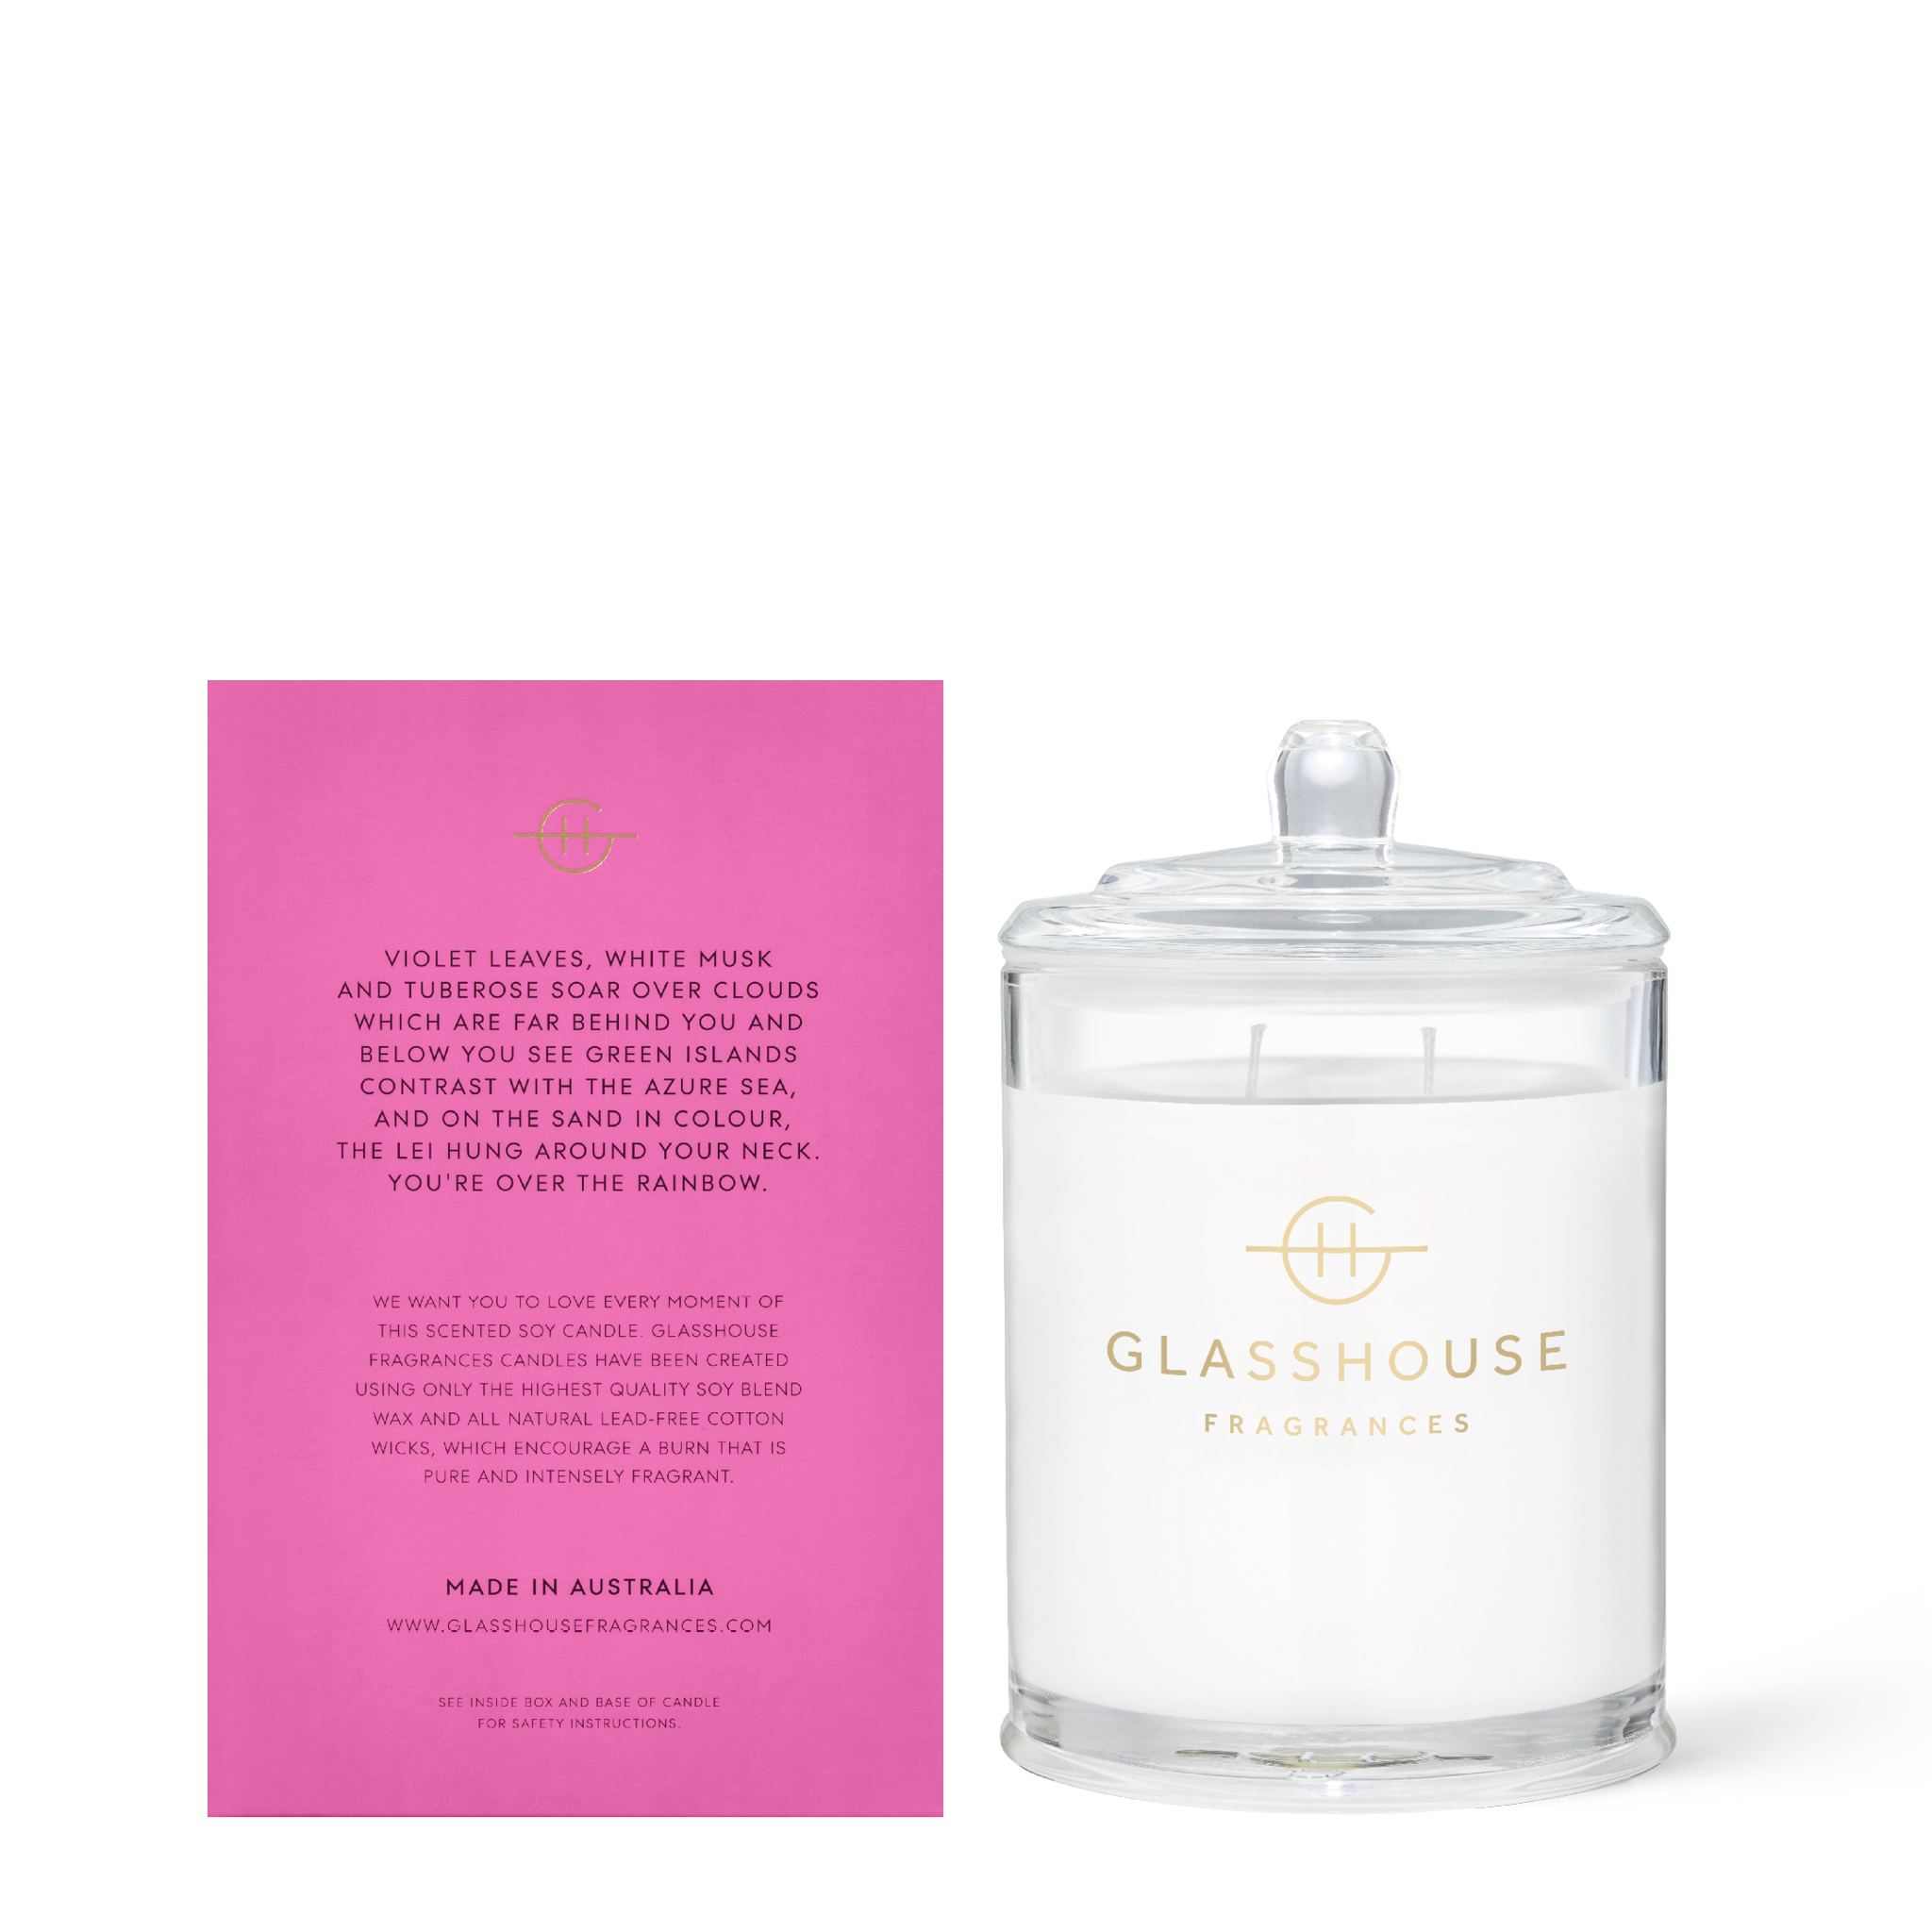 Glasshouse Fragrances Over the Rainbow Violet Leaves and White Musk 380g Soy Candle with box - back of product shot